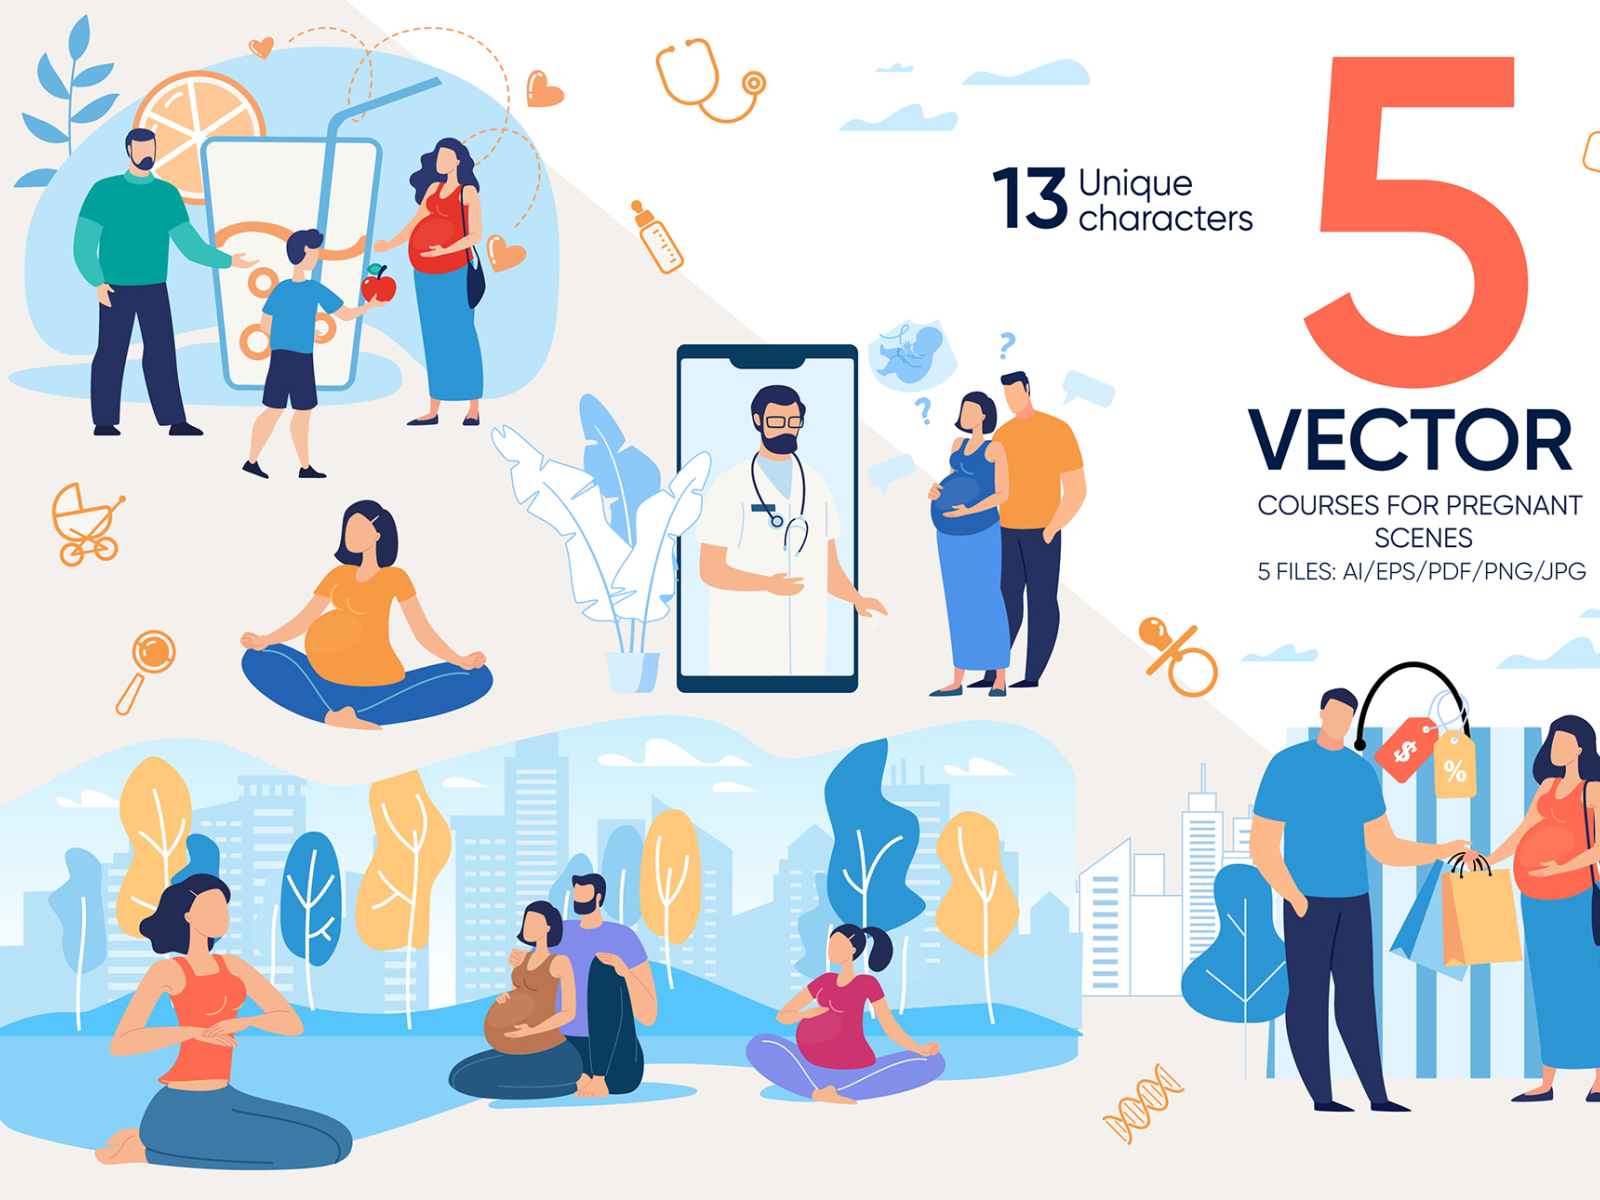 Courses for Pregnant Vector Scenes by Tera Luiza on Dribbble